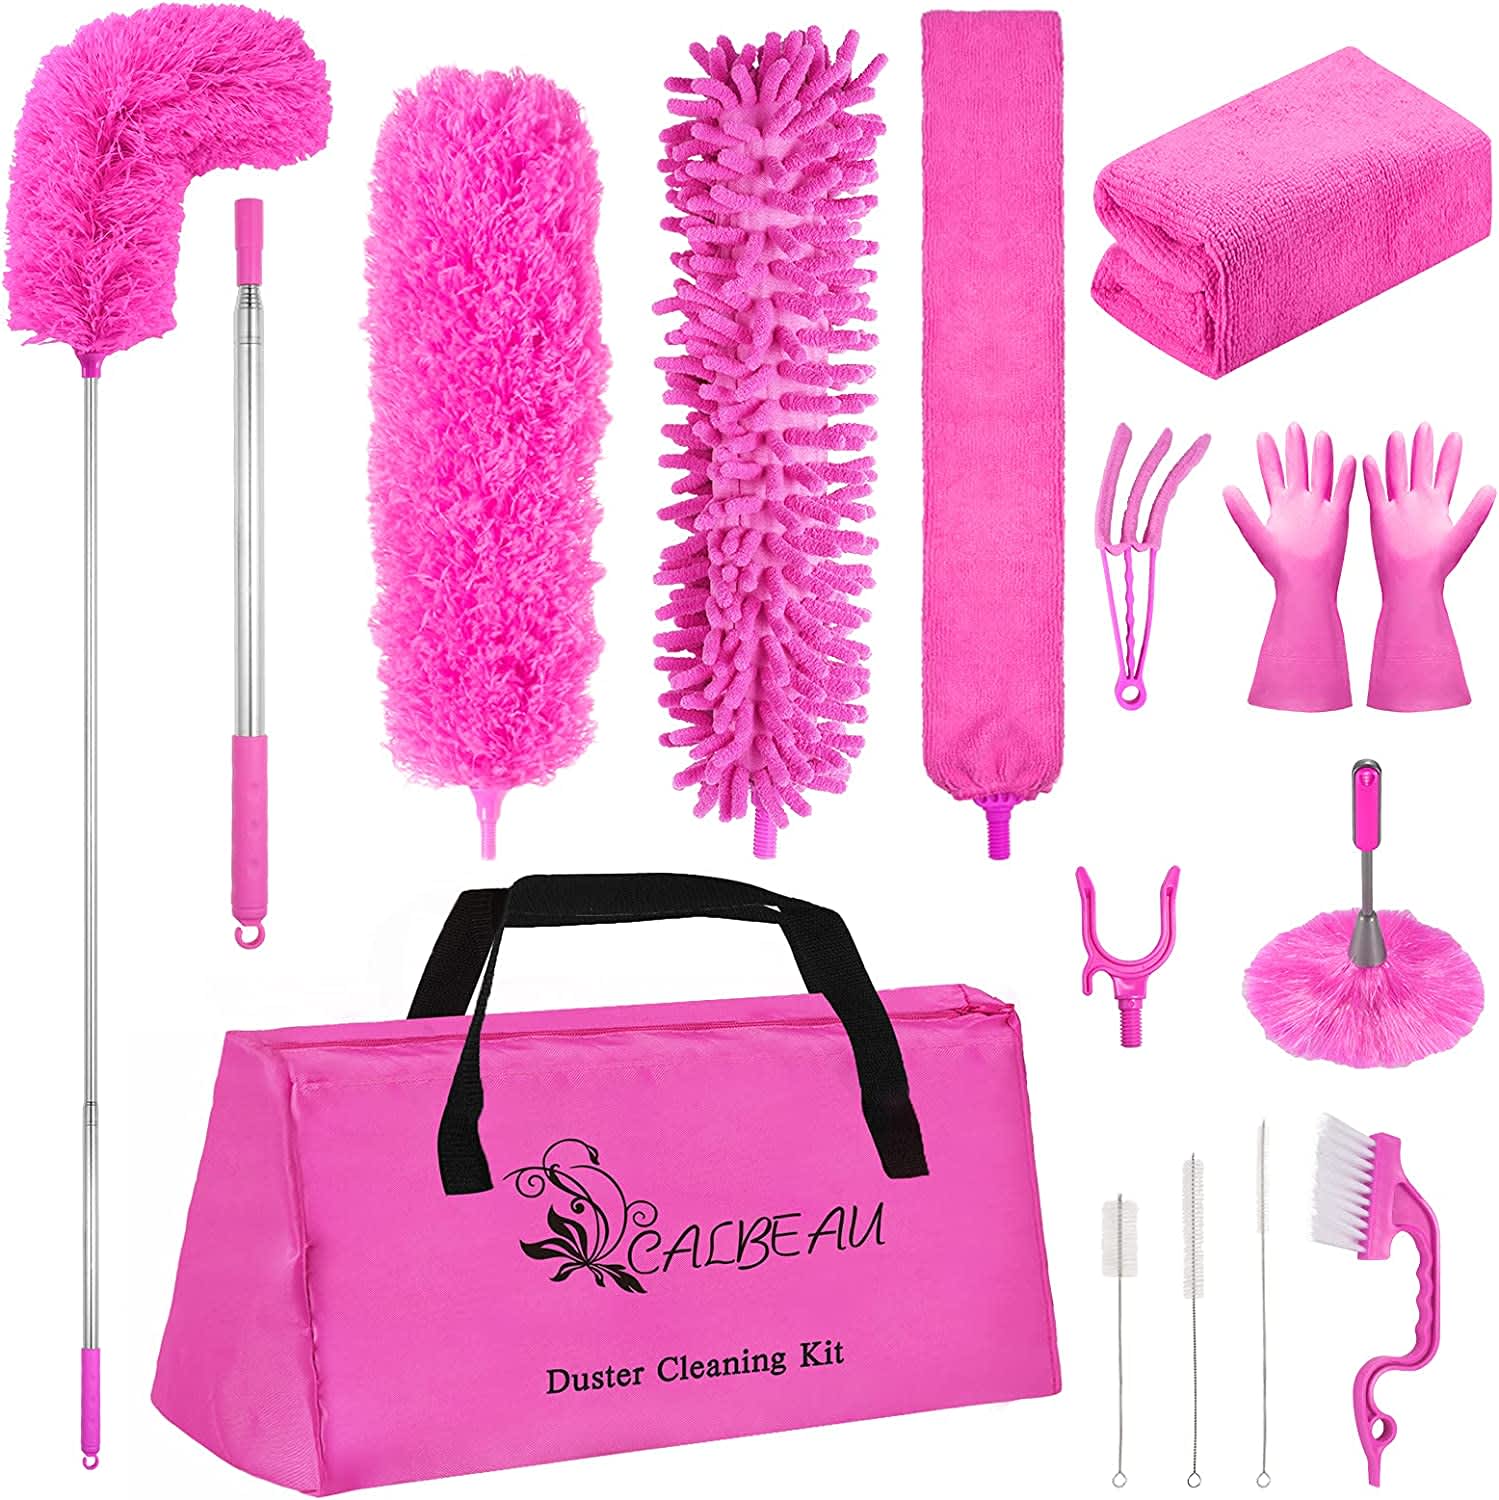 http://cdn.apartmenttherapy.info/image/upload/v1657290085/at/organize-clean/Amazon_Pink_Duster_Cleaning_Kit.jpg